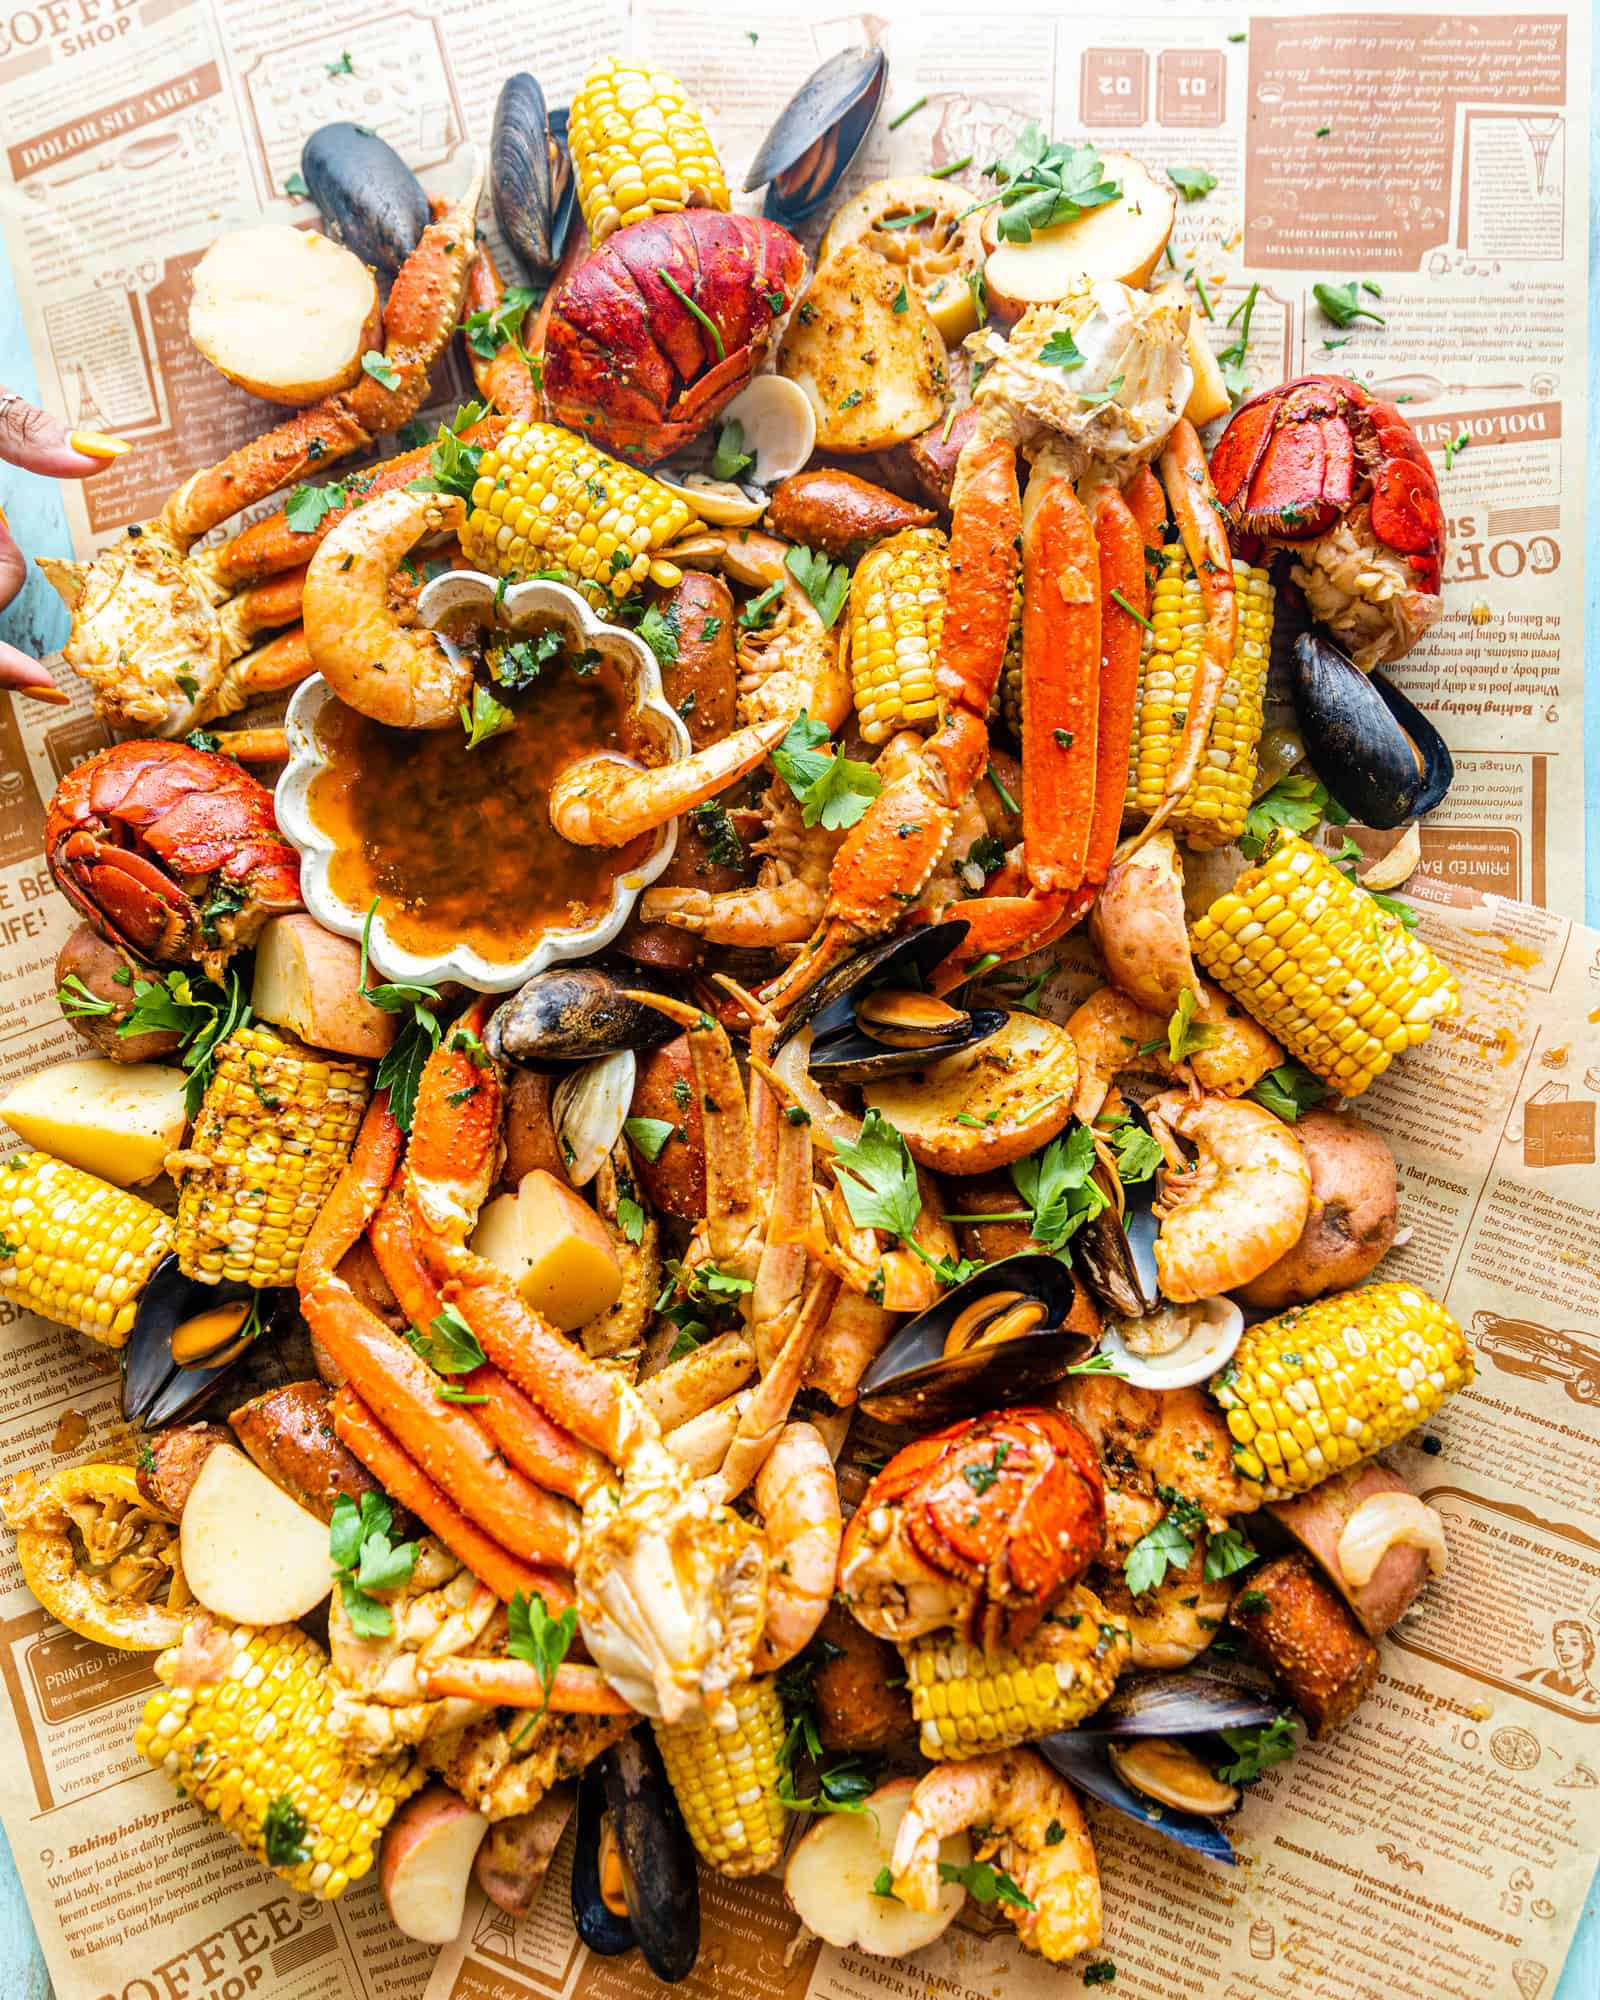 Shrimp, Lobster, Crab Legs, Clams, Corn, Mussels, and Sausages on a piece of newspaper with garlic butter sauce